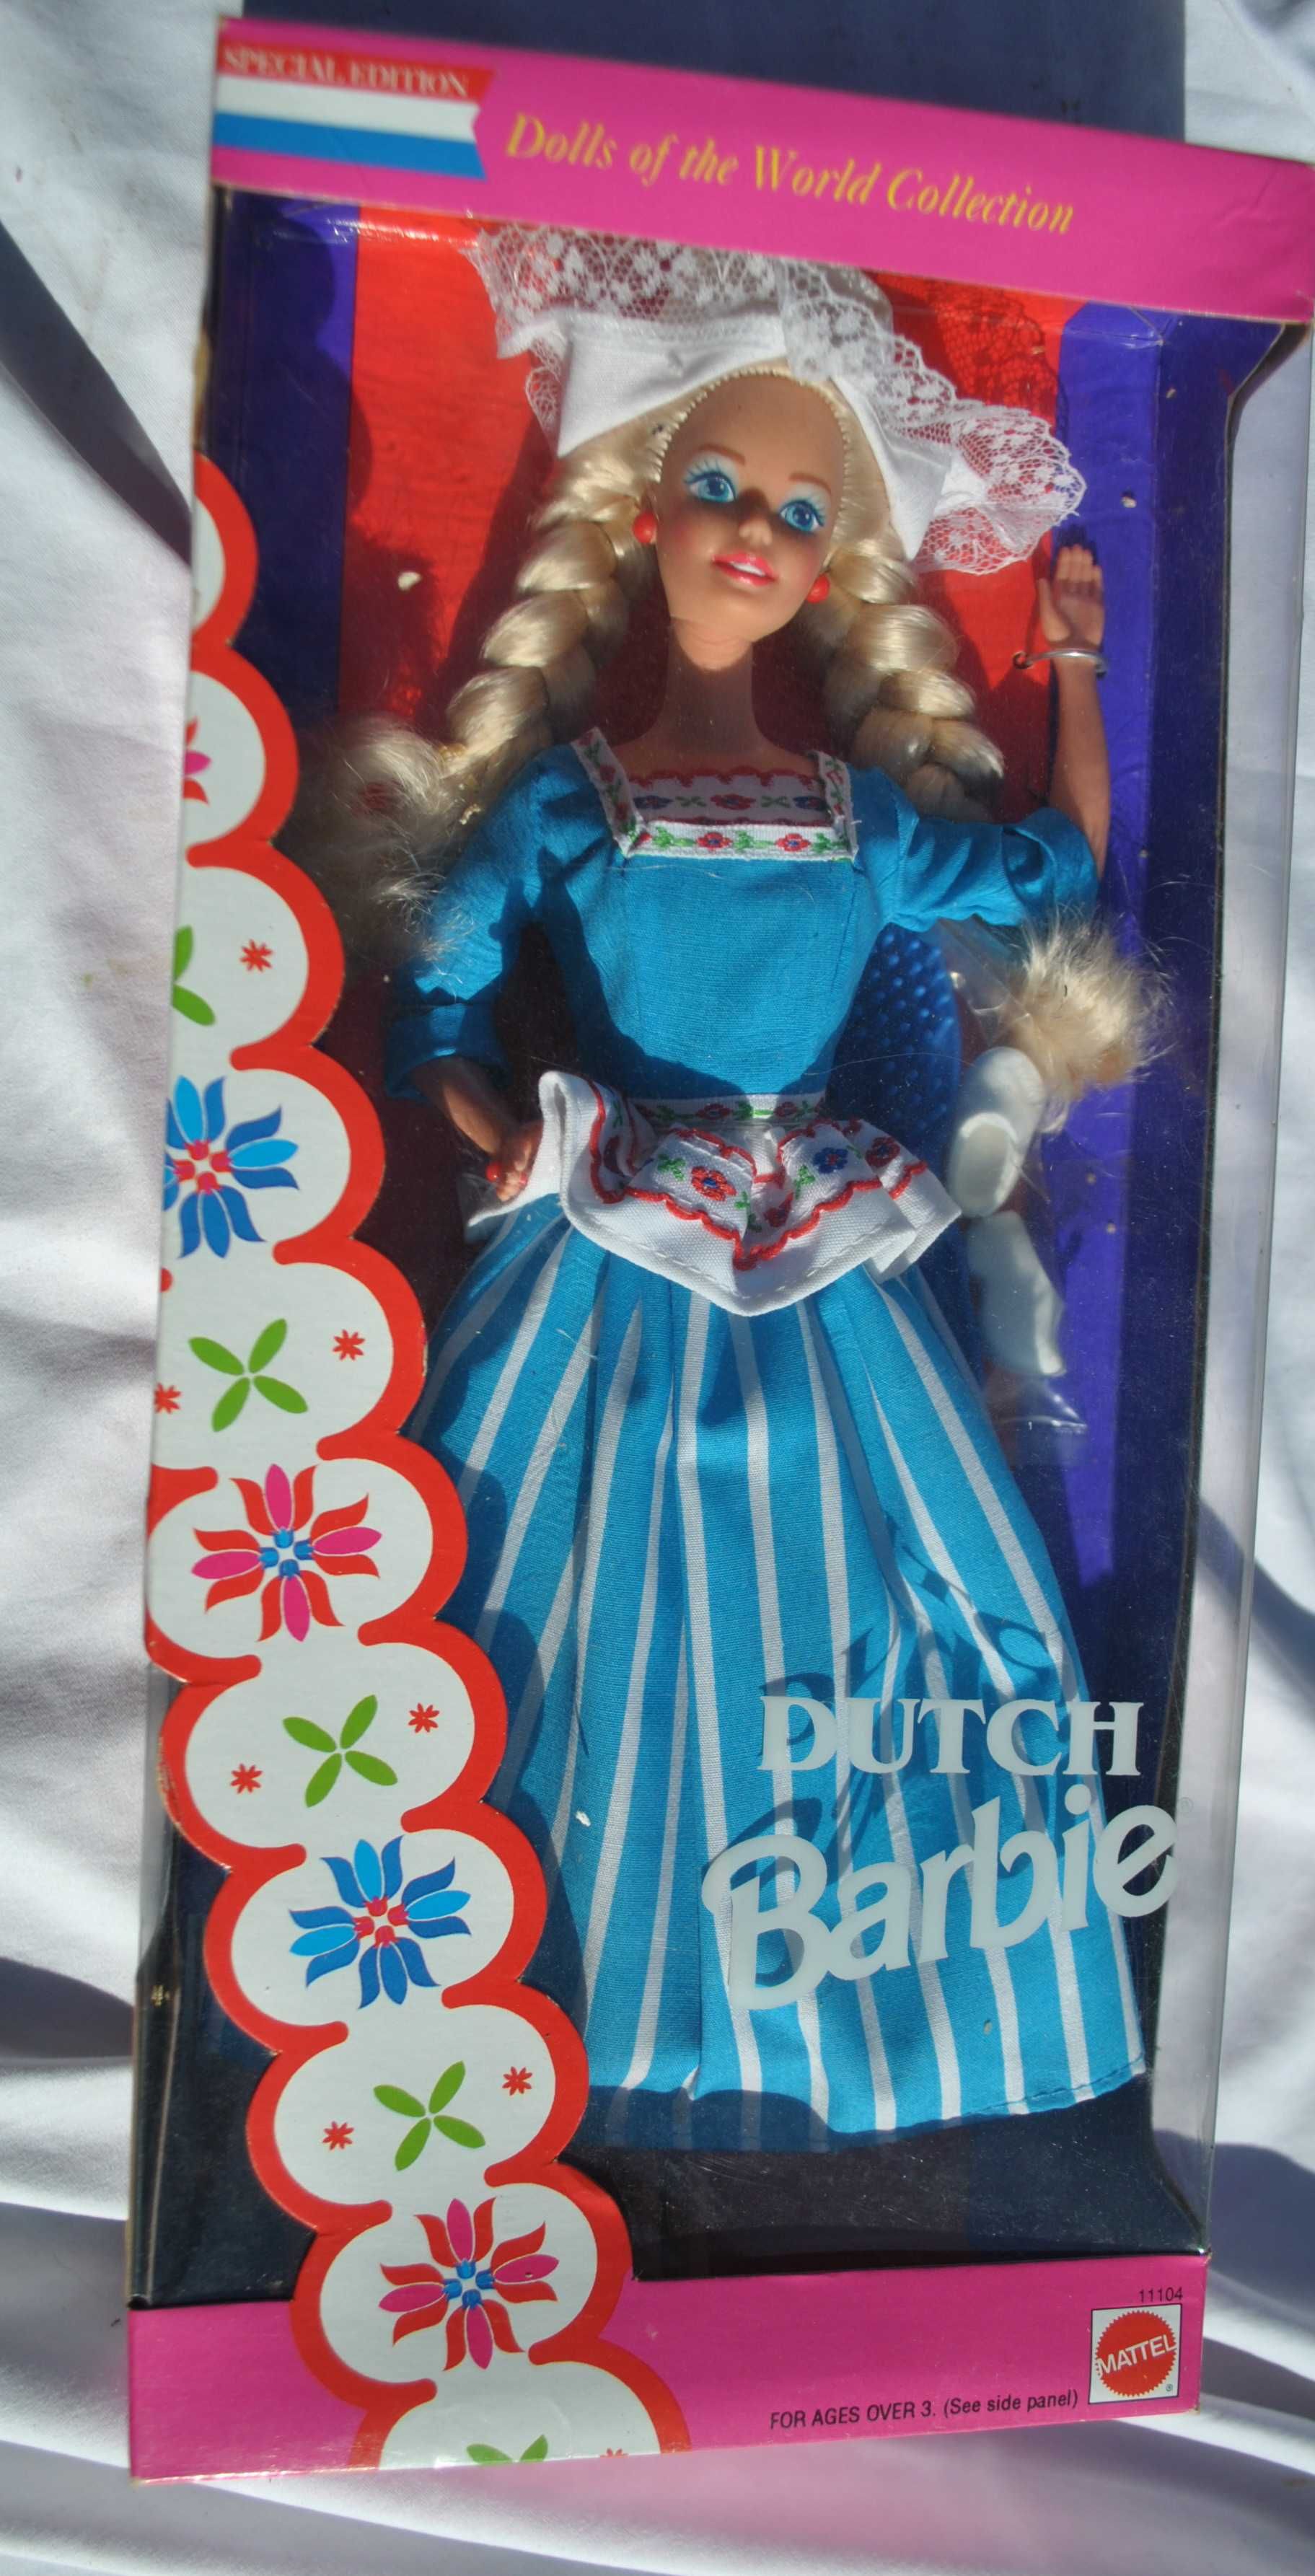 lalka barbie DUTCH Dolls of the World Collection 1993